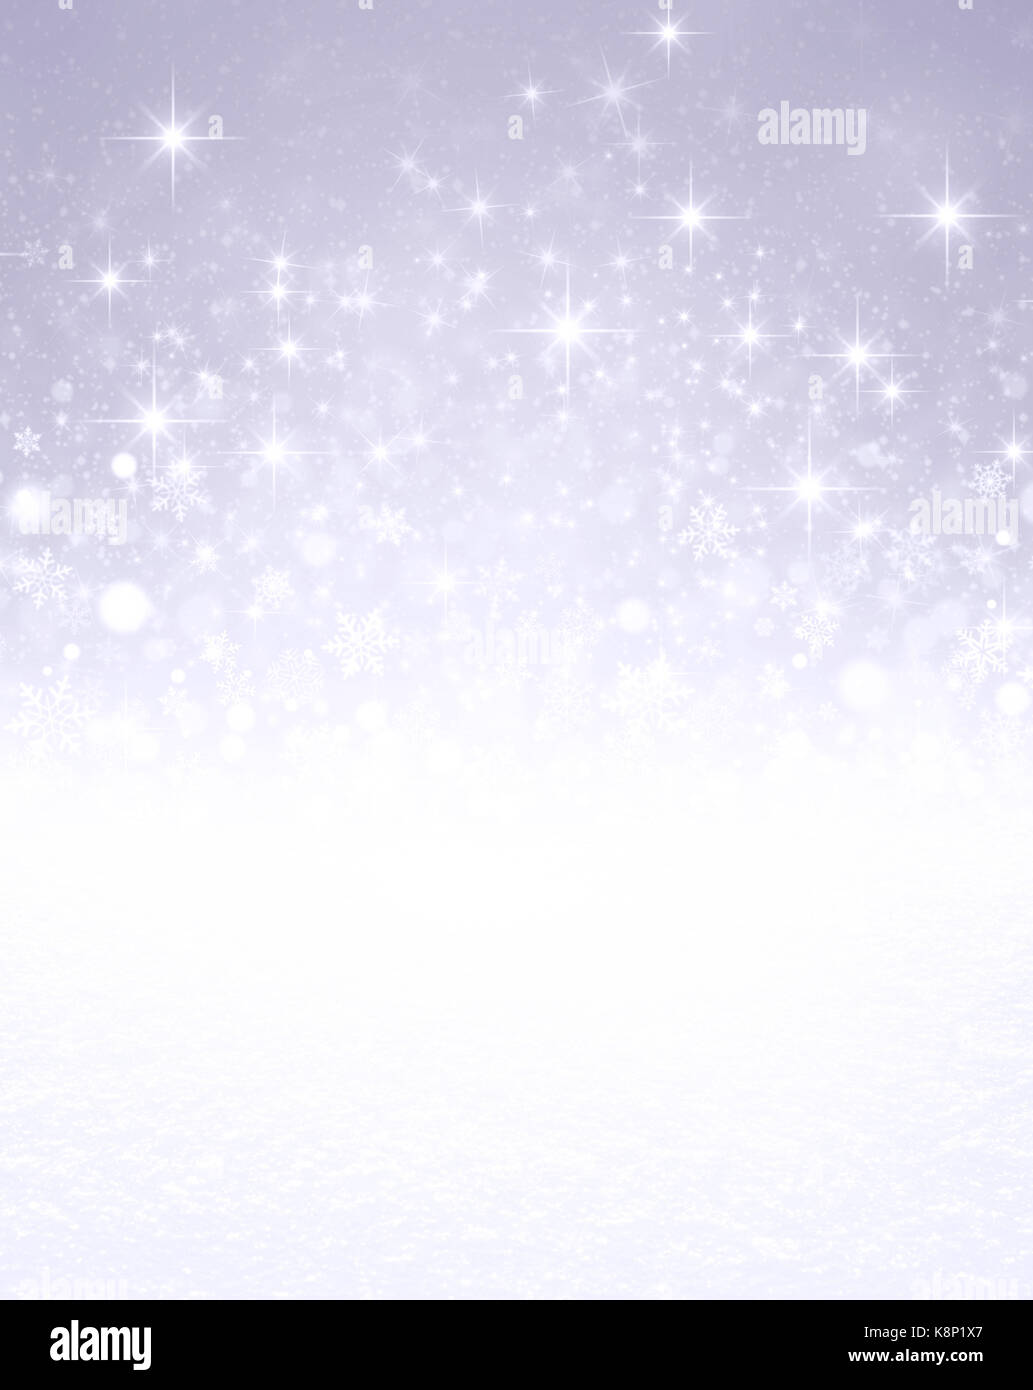 Falling snowflakes, white snow and bright light on a glittering silver colored background Stock Photo